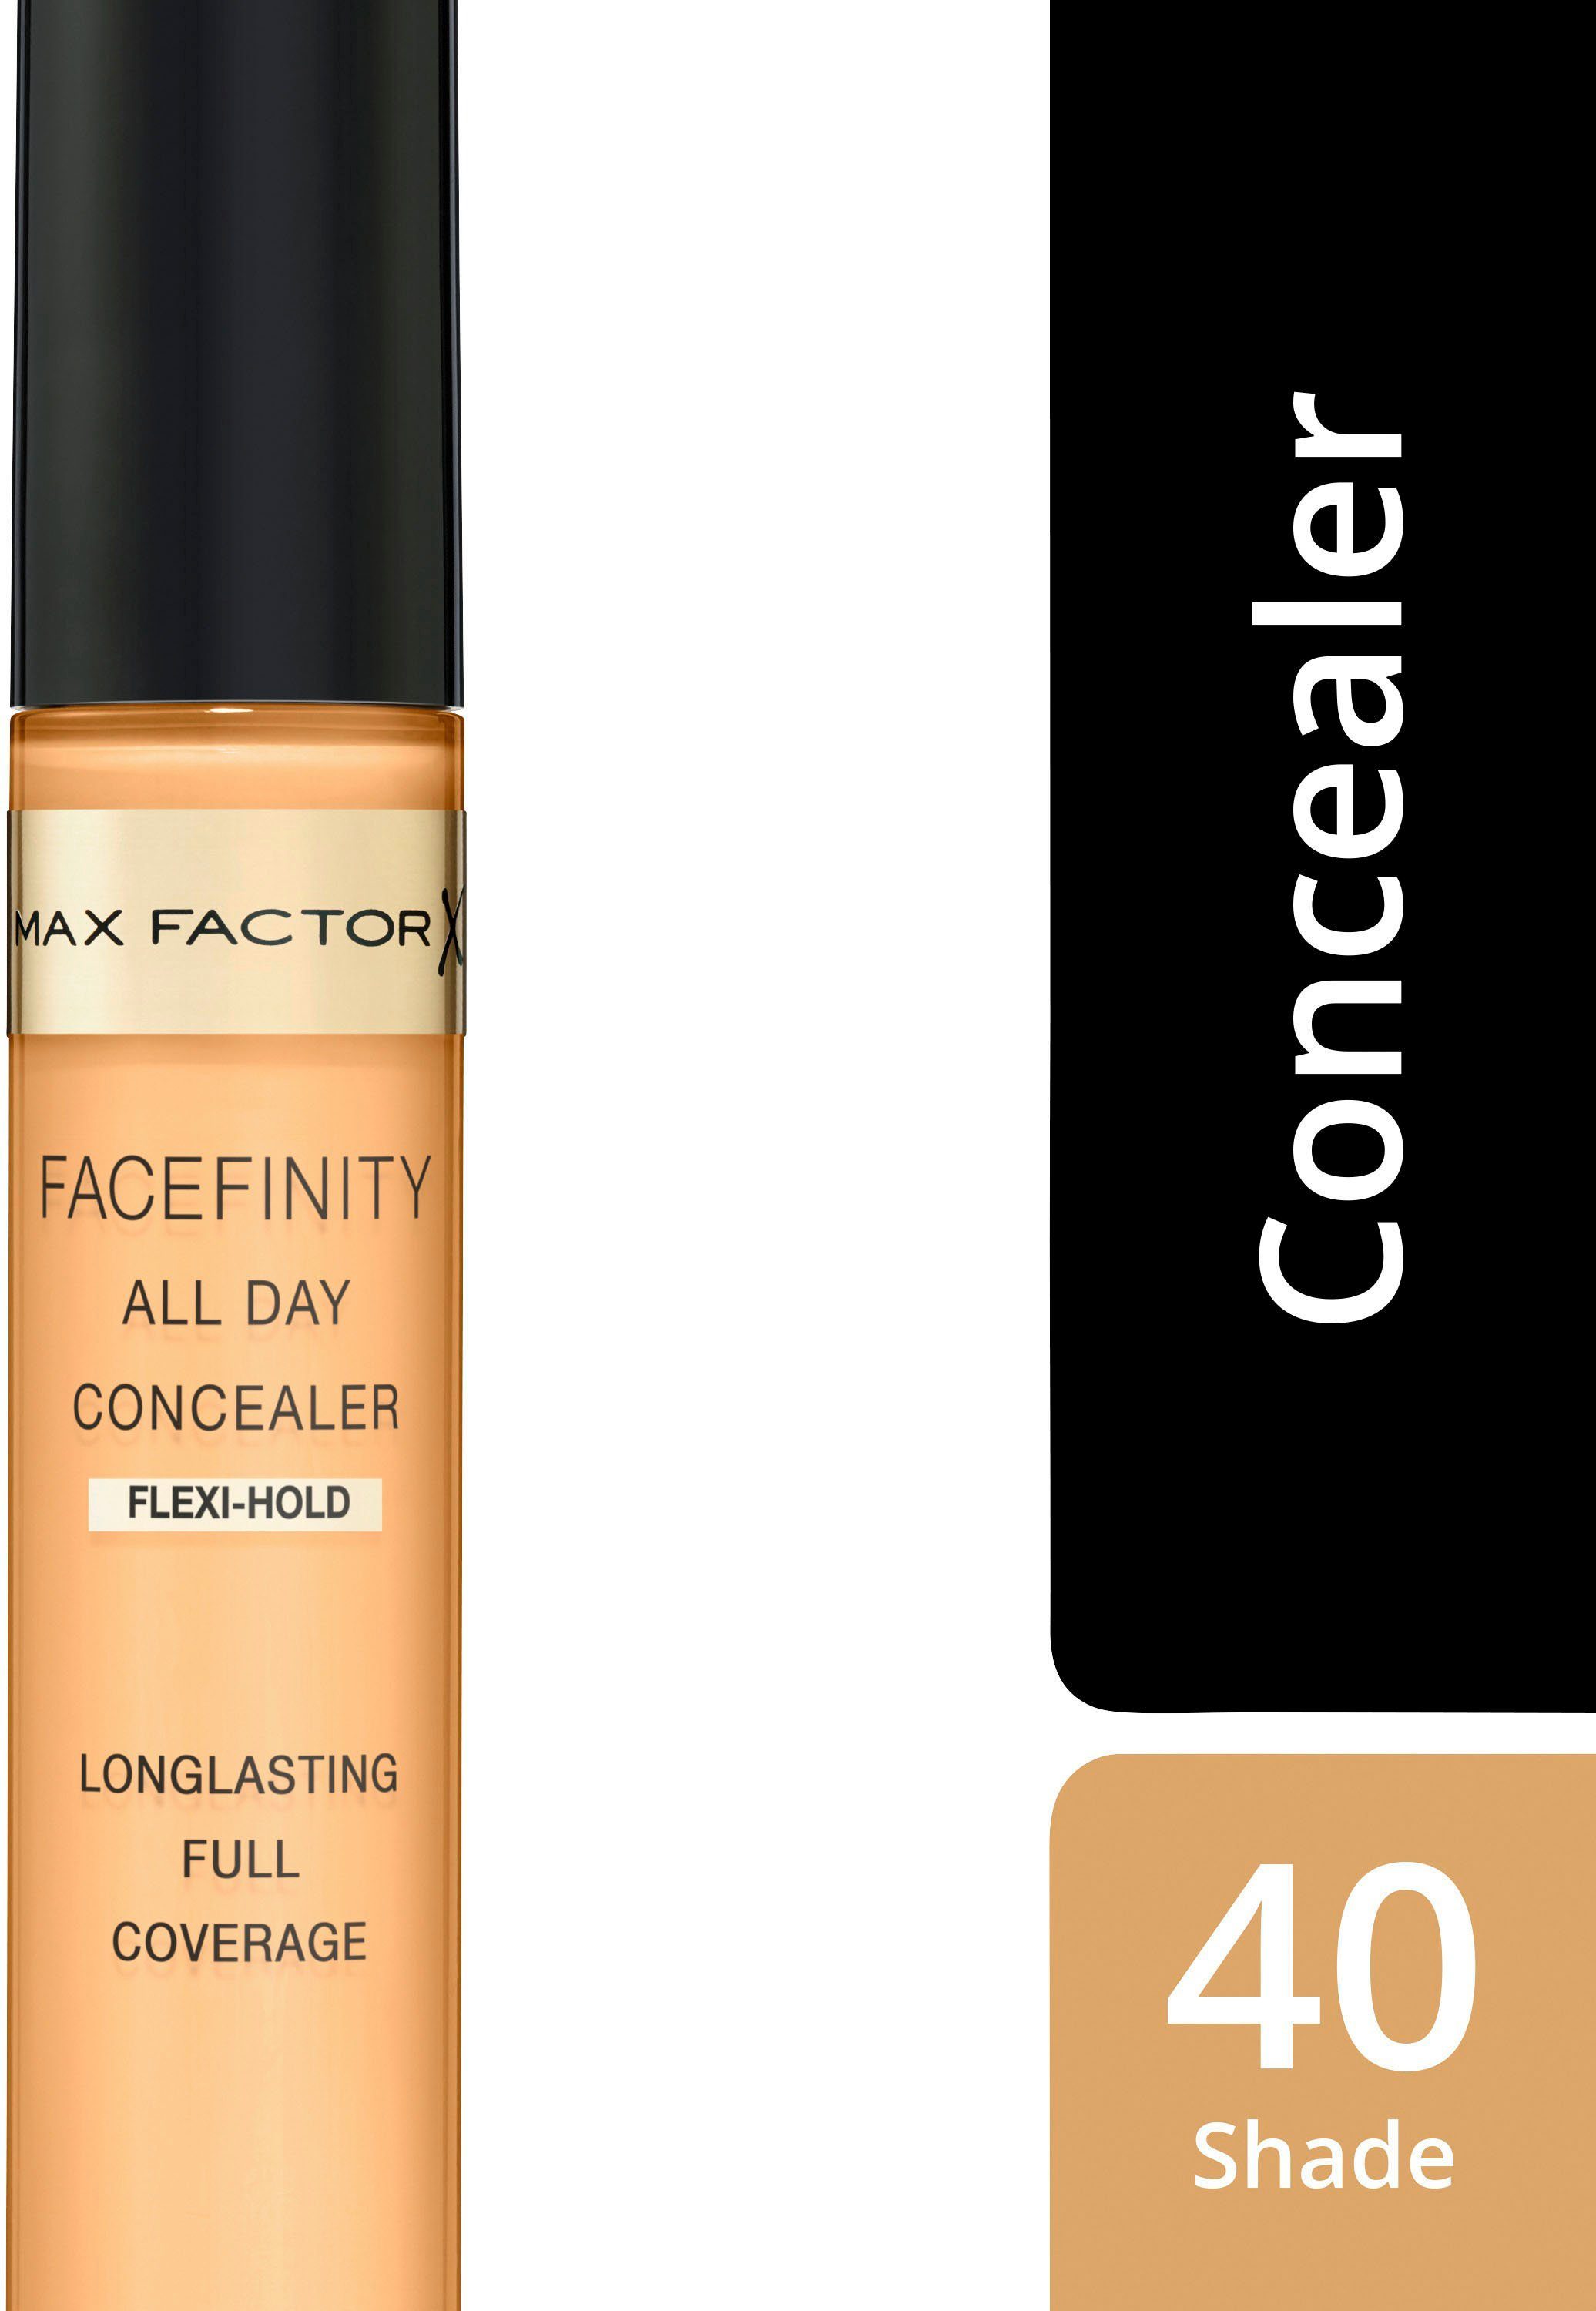 MAX FACTOR FACEFINITY All Flawless Day 40 Concealer